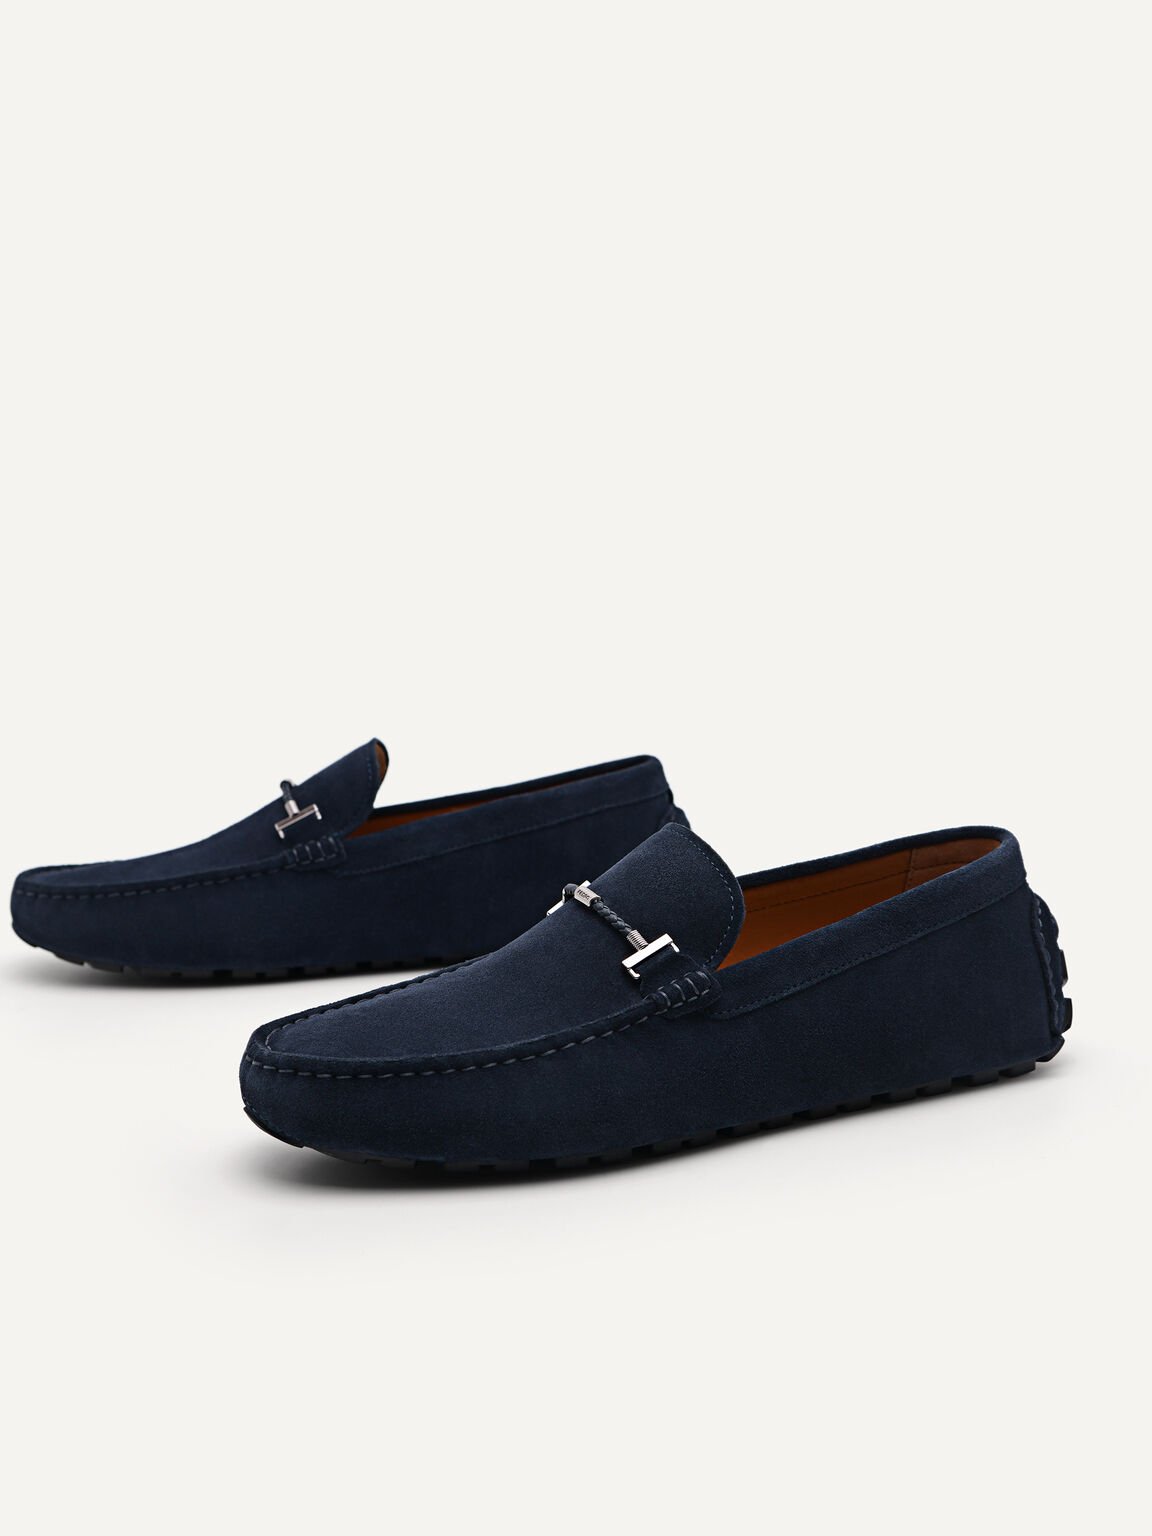 Robert Leather Moccasins, Navy